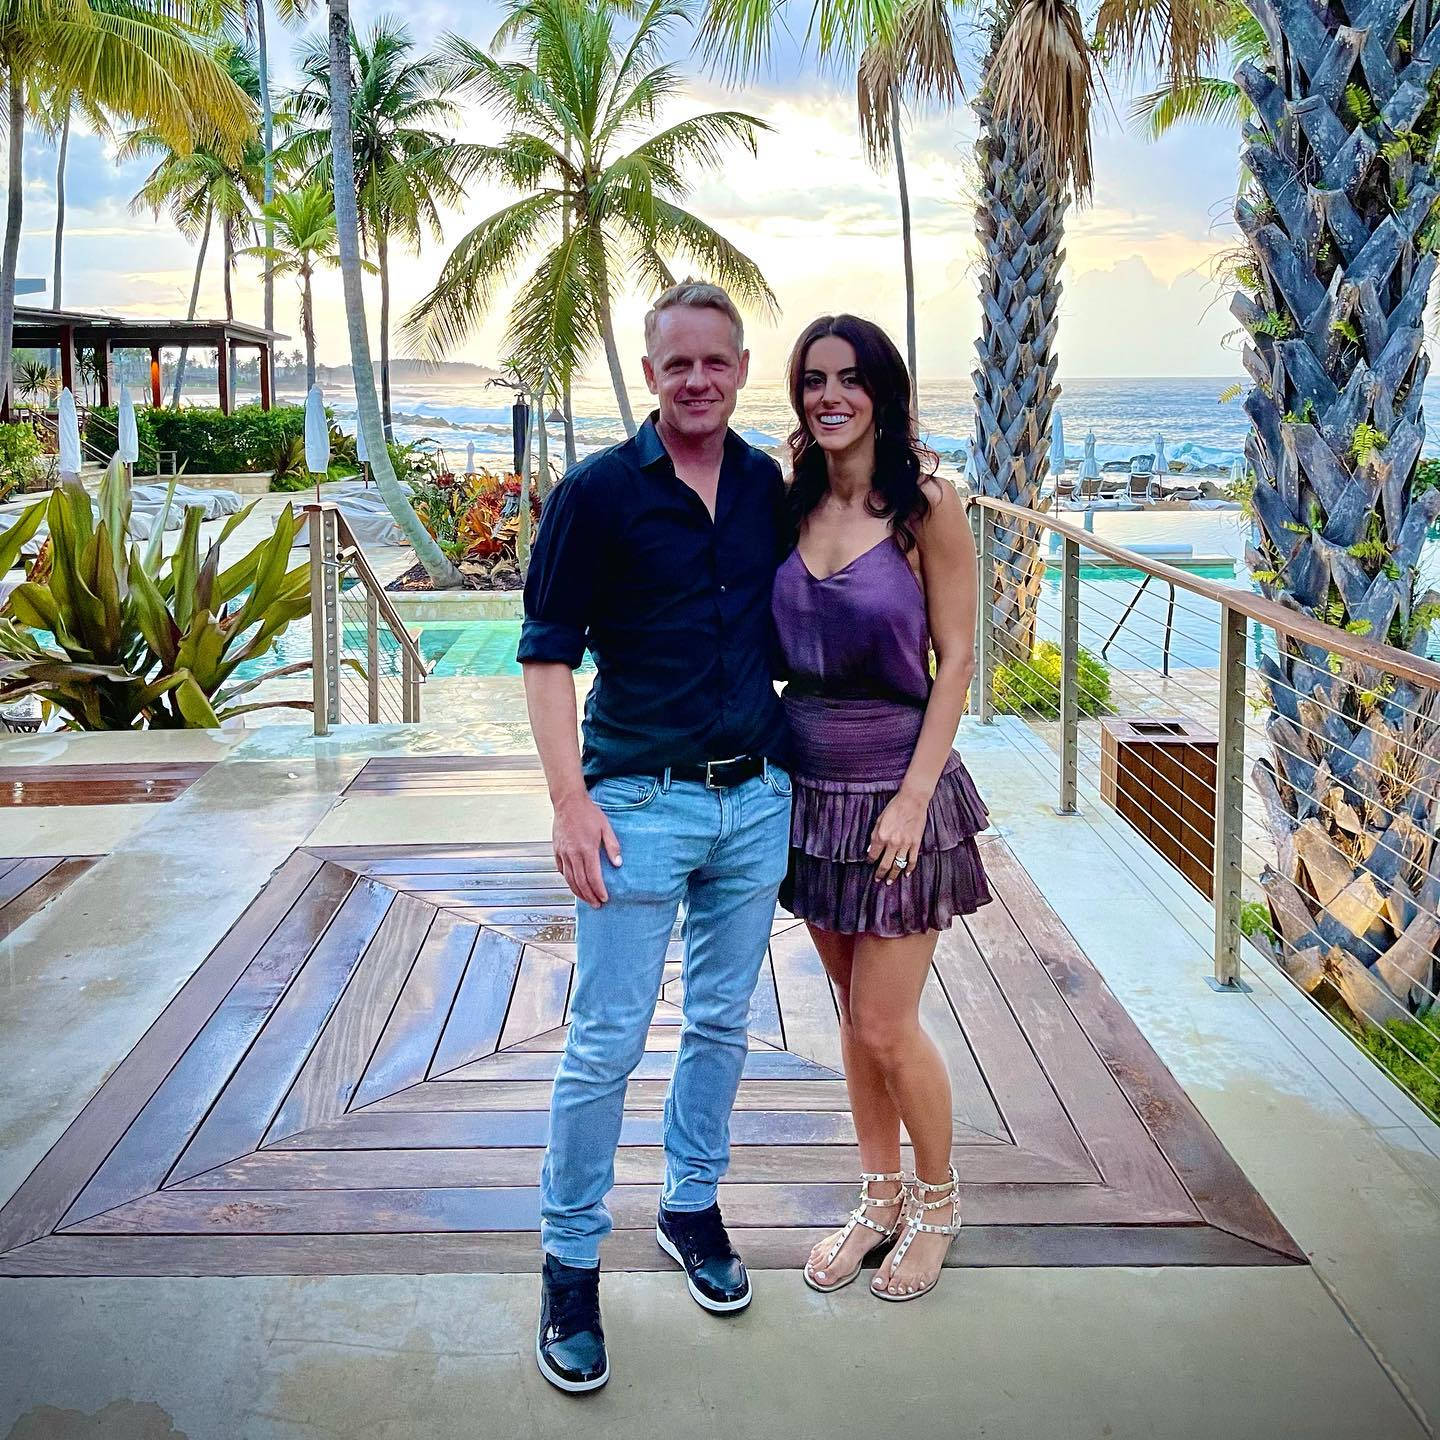 Luke Donald And Wife In A Resort Wallpaper